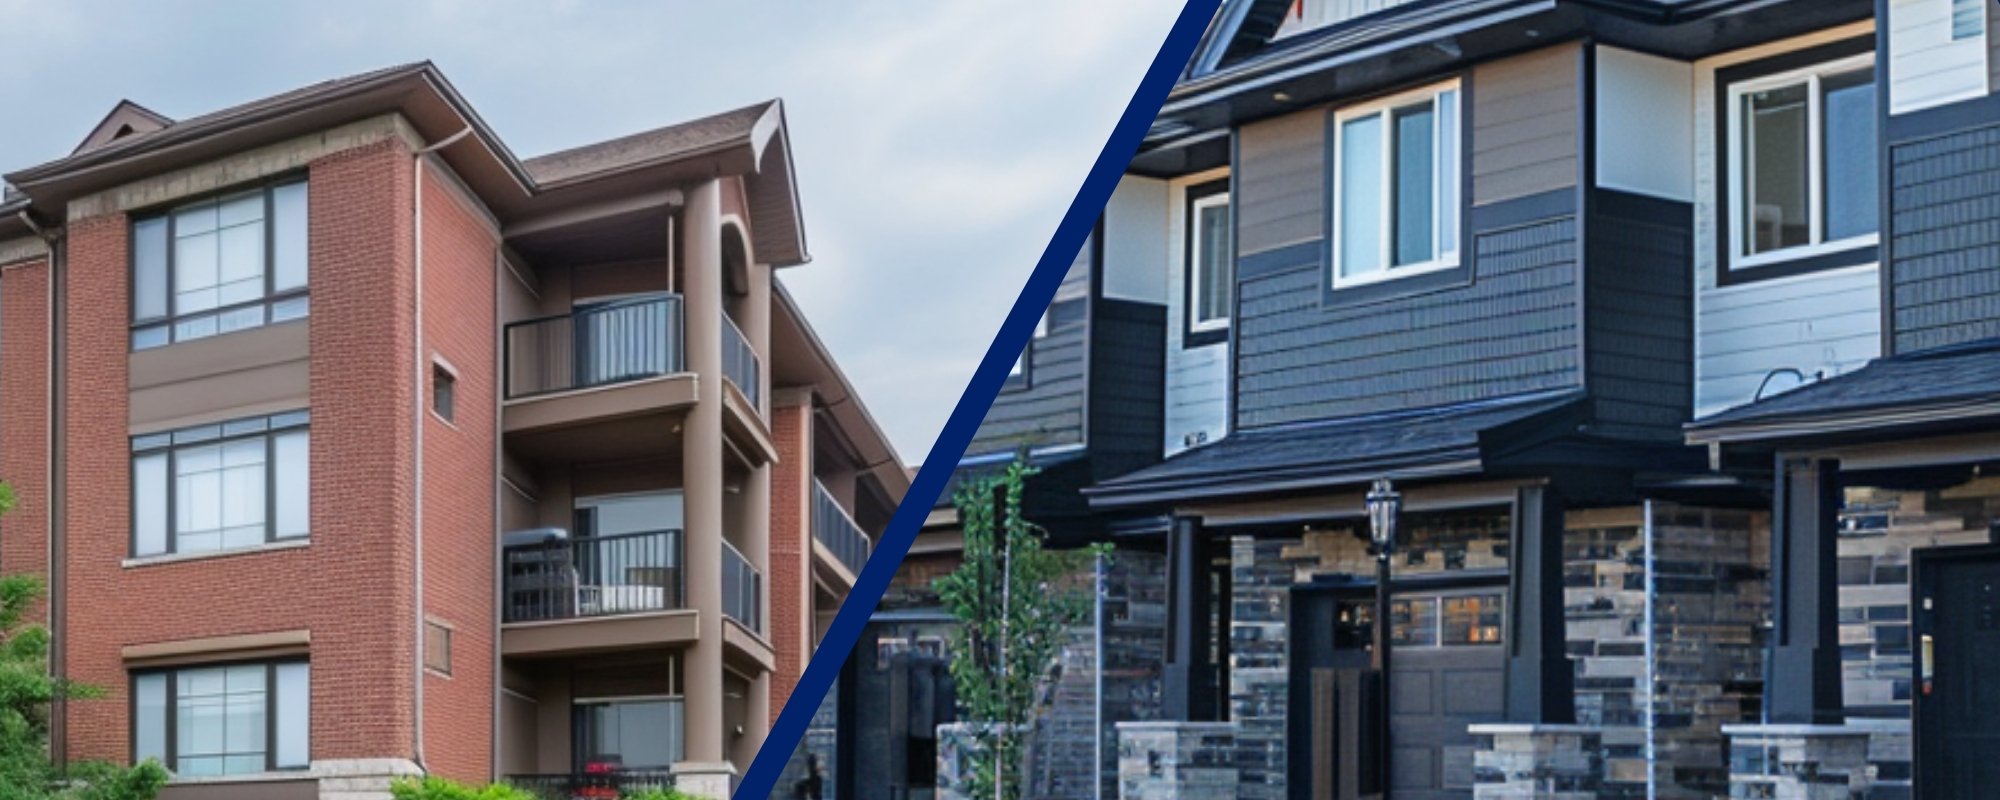 Condominiums vs. Townhomes in North Carolina - Understanding the Key Differences